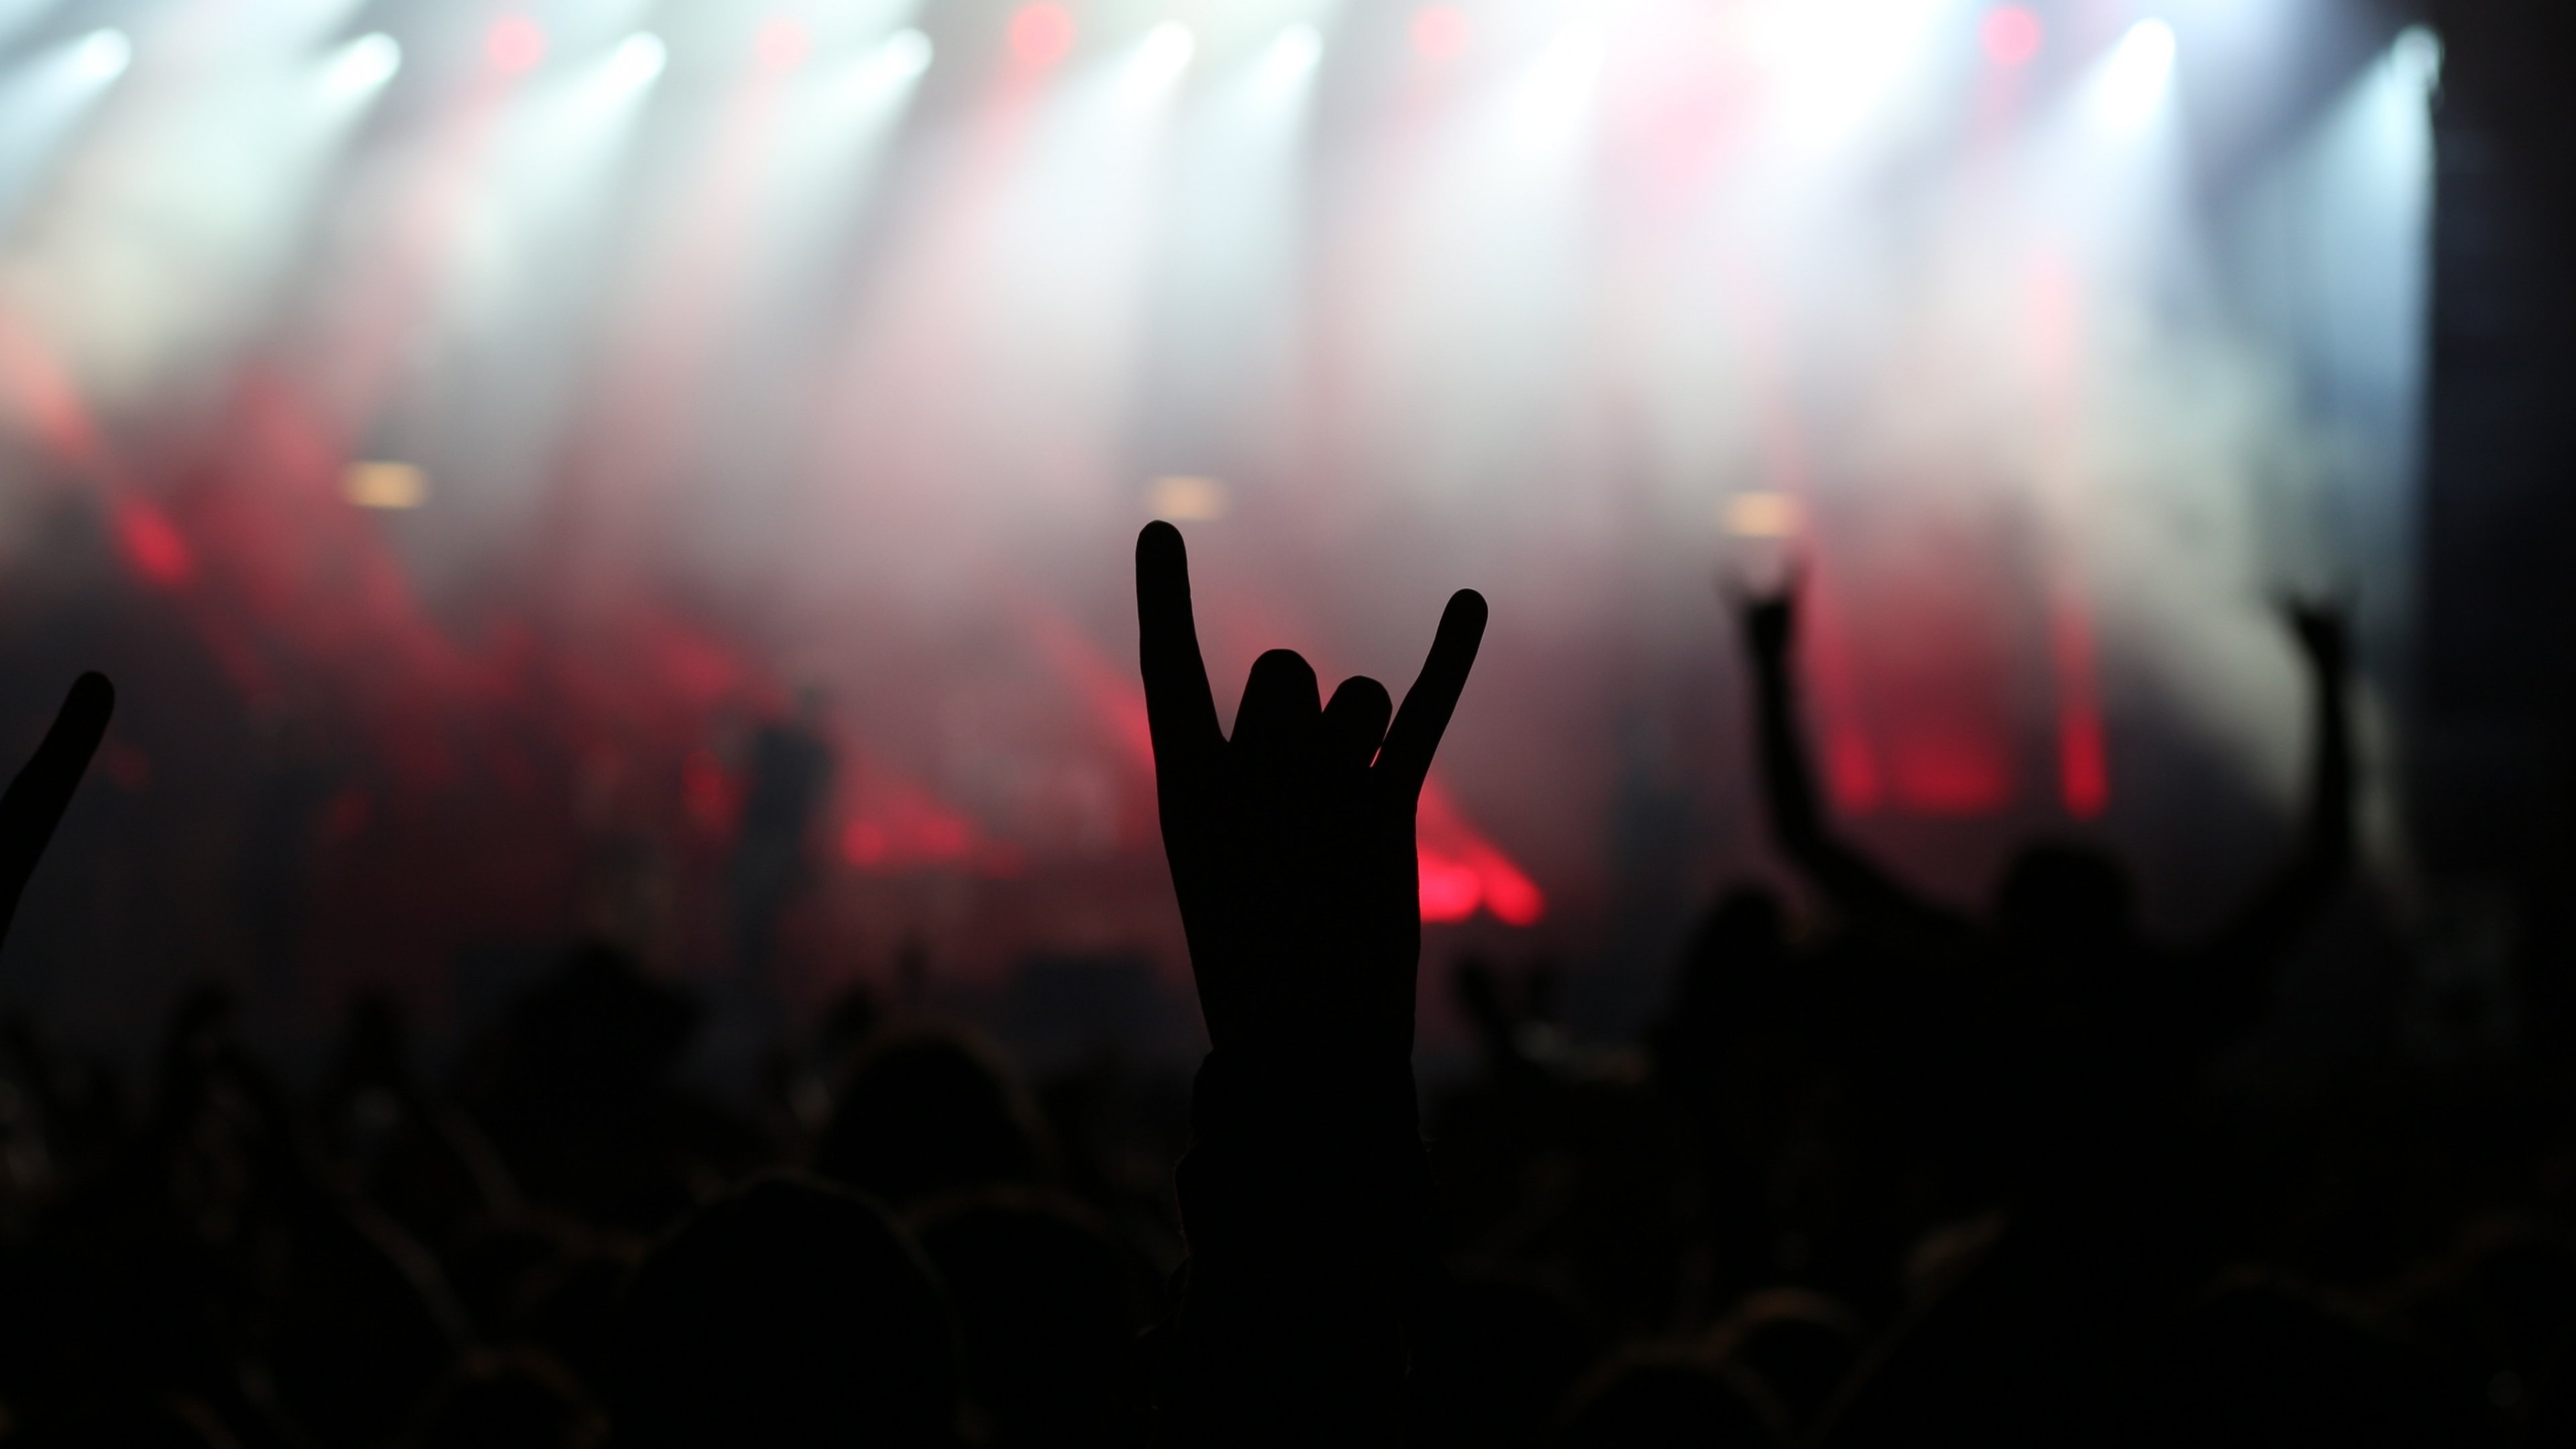 Download wallpaper 3840x2160 rock party, music concert, dance, hands, party 4k  wallpaper, uhd wallpaper, 16:9 widescreen 3840x2160 hd background, 411